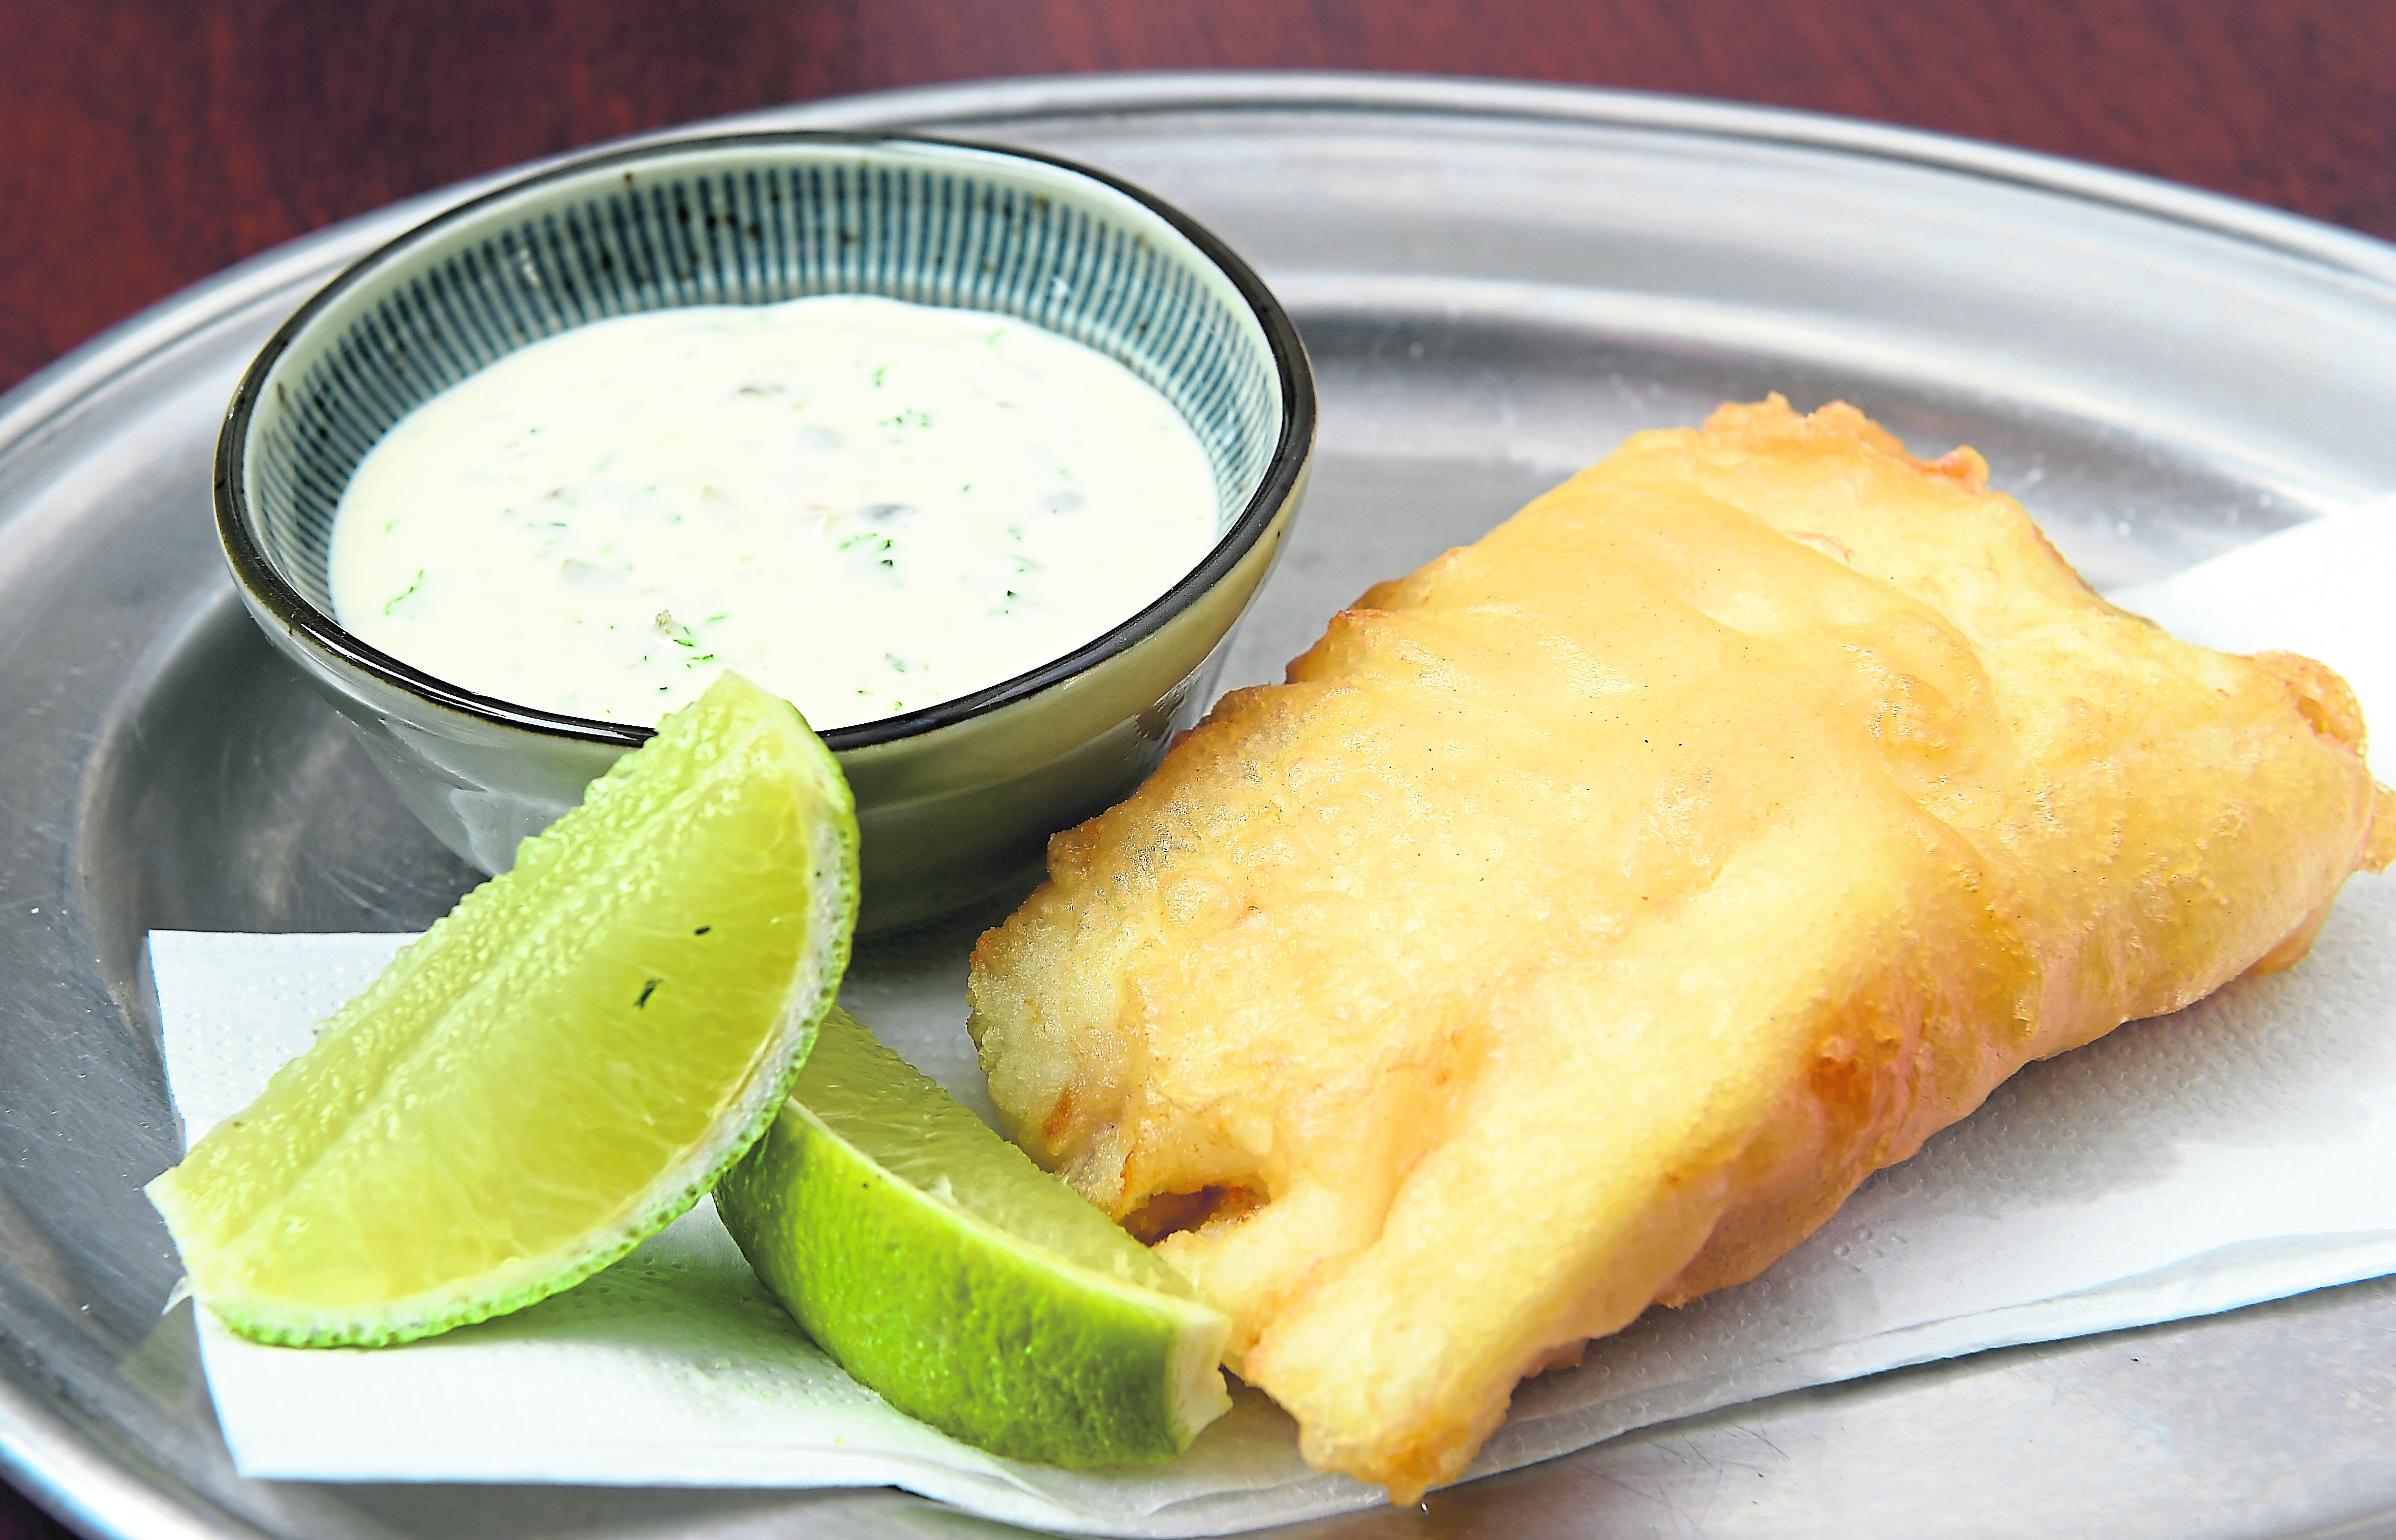 Perfect battered fish and tartare sauce.